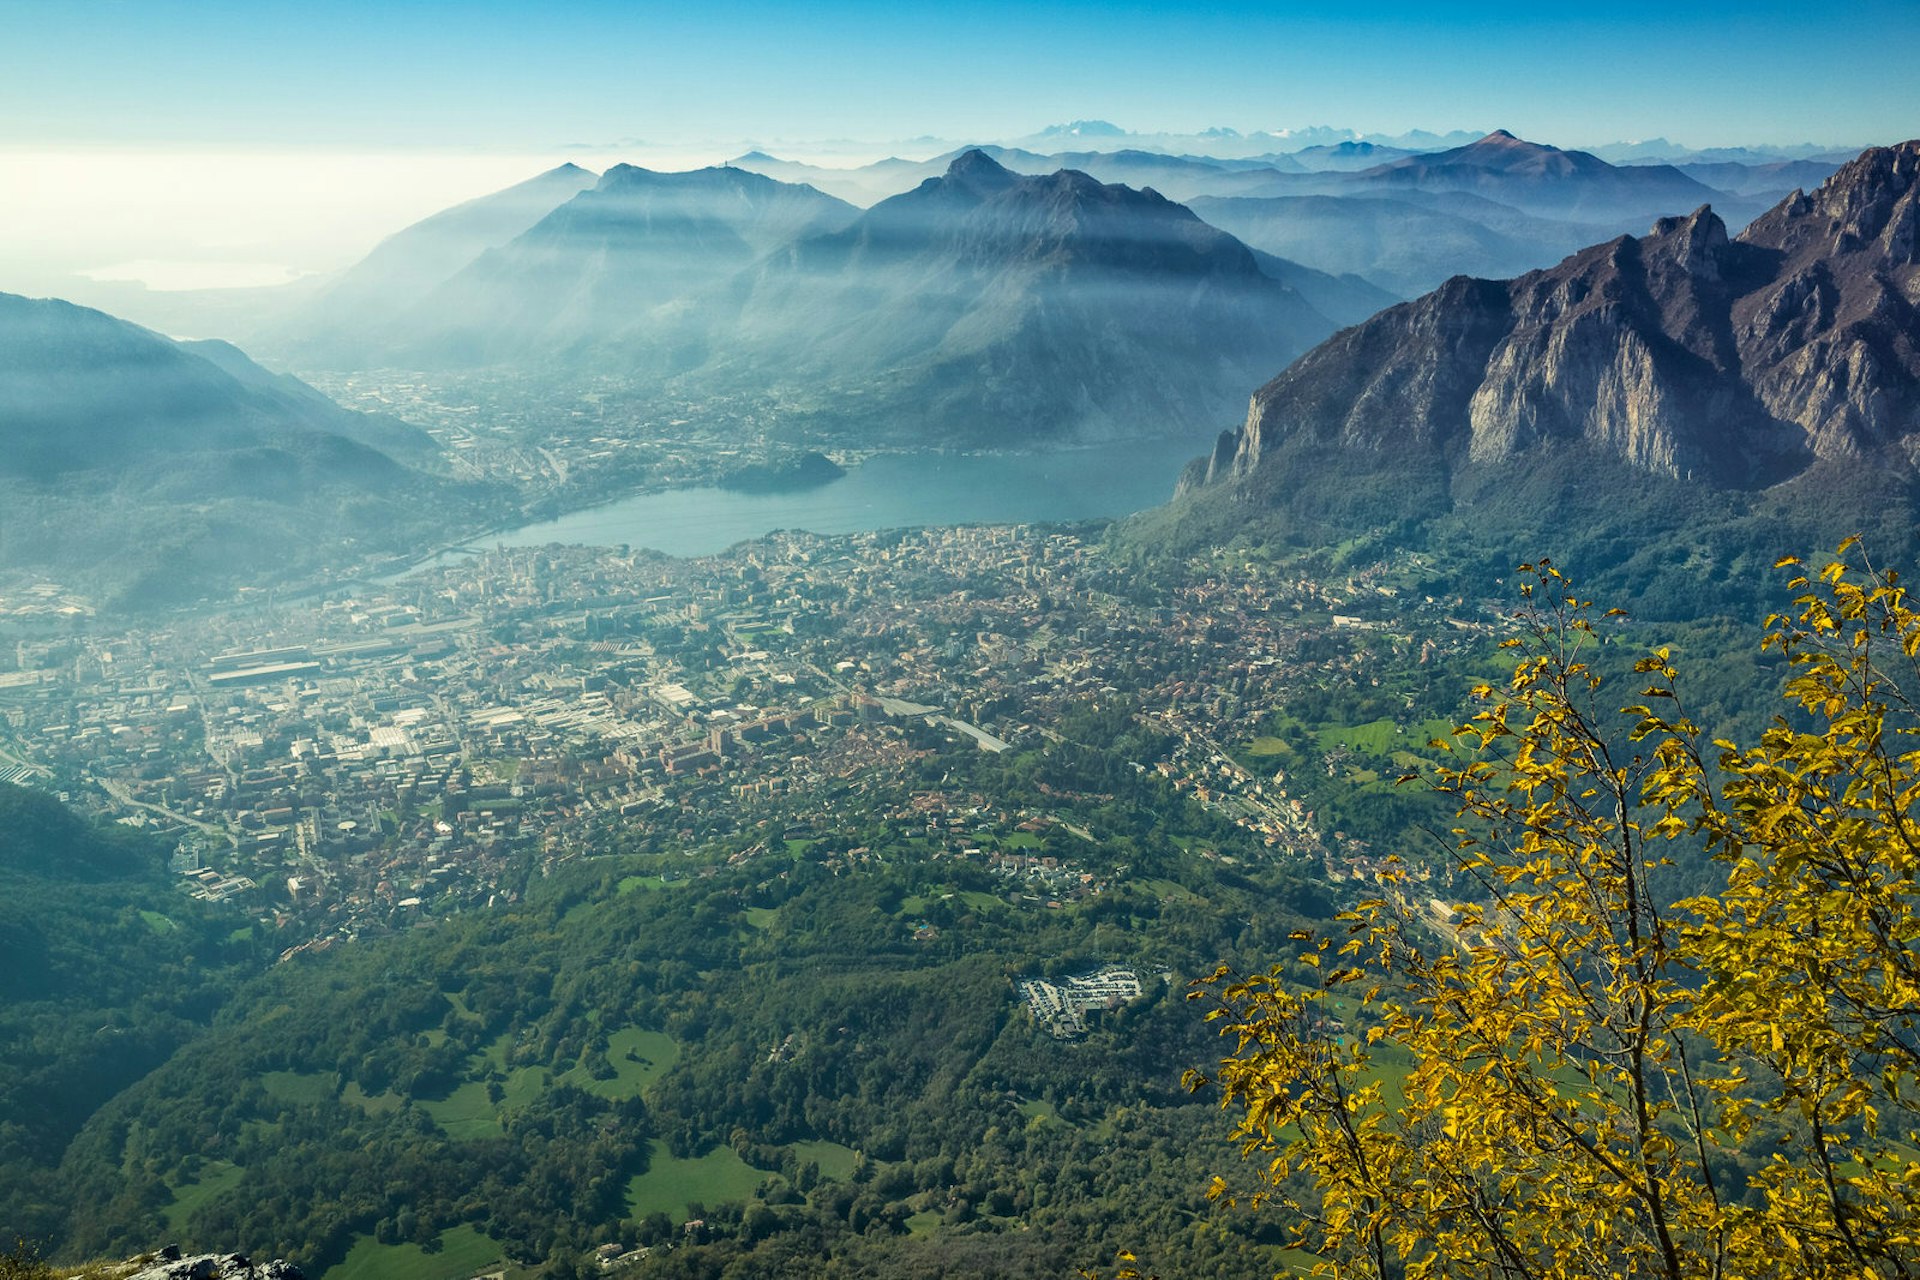 View from a hill towards the town of Lecco and Lake Como, with mountains in the distance